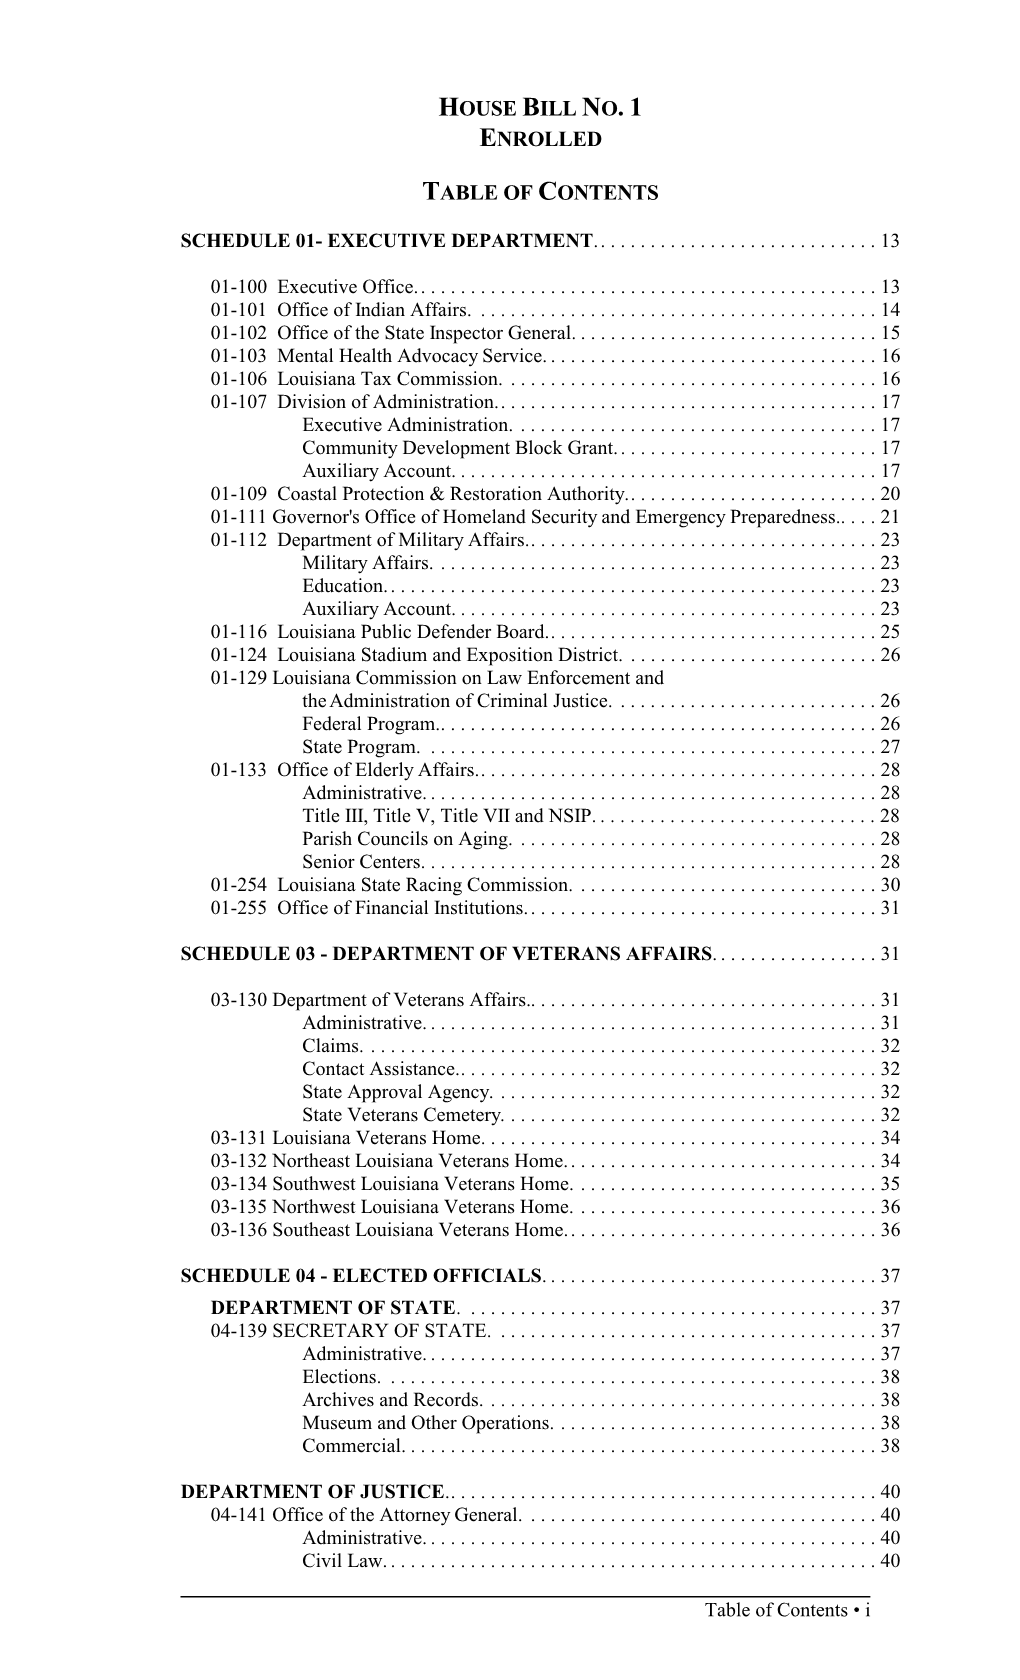 House Bill No. 1 Enrolled Table of Contents